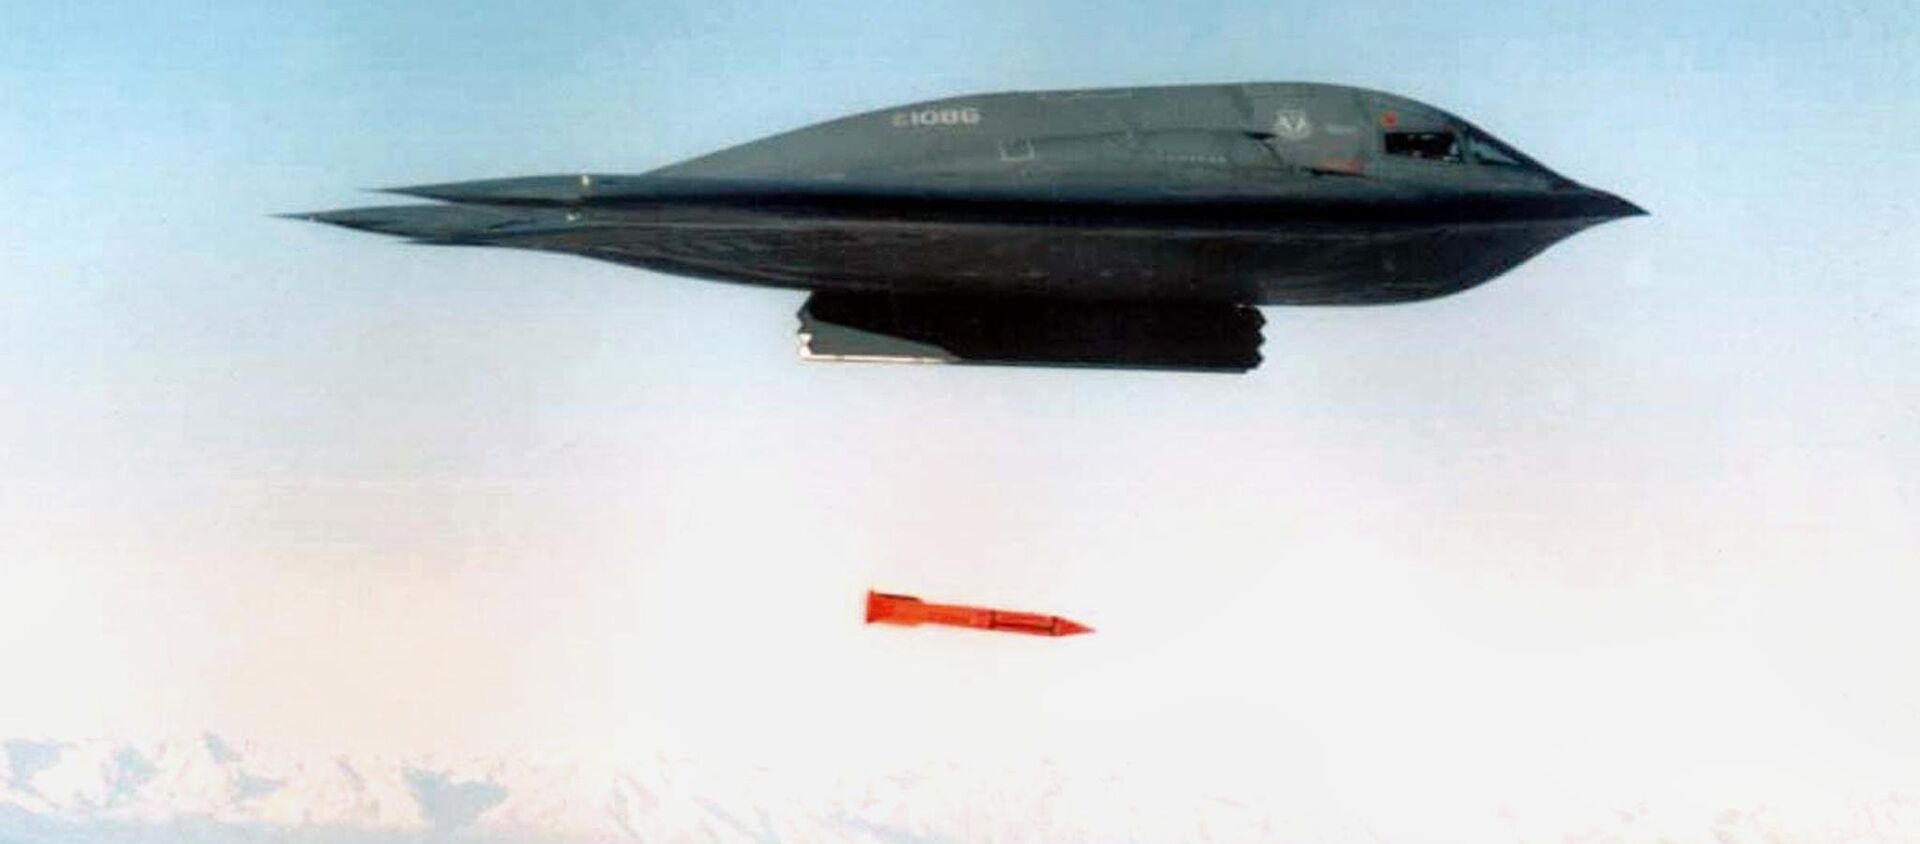 An undated file picture shows a B-2 Spirit Bomber droping a B61-11 bomb casing from an undisclosed location - Sputnik Mundo, 1920, 05.10.2018